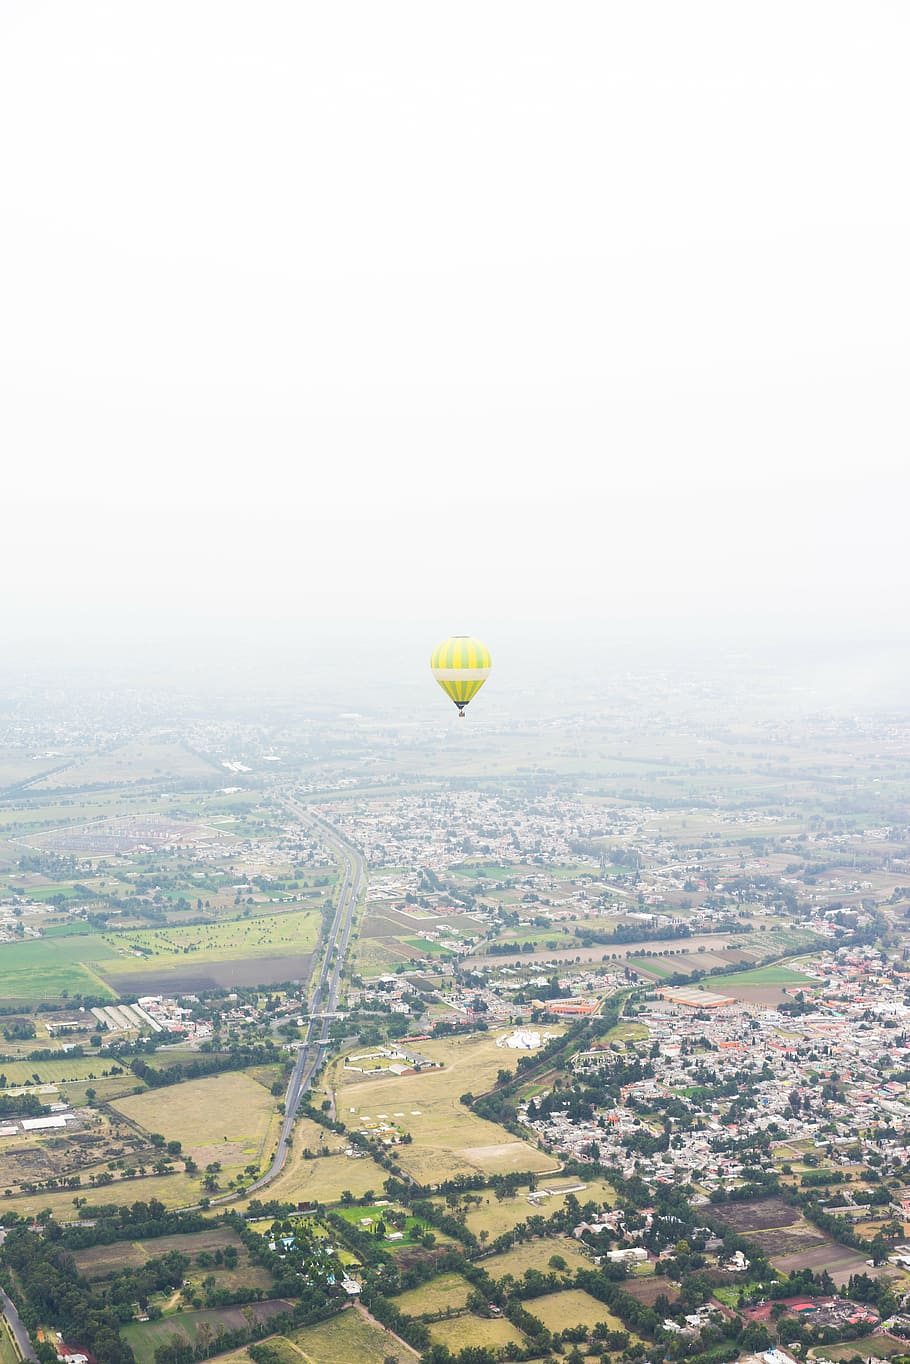 green, hot, air balloon, floating, houses, field, daytime, balloon, land, aerial